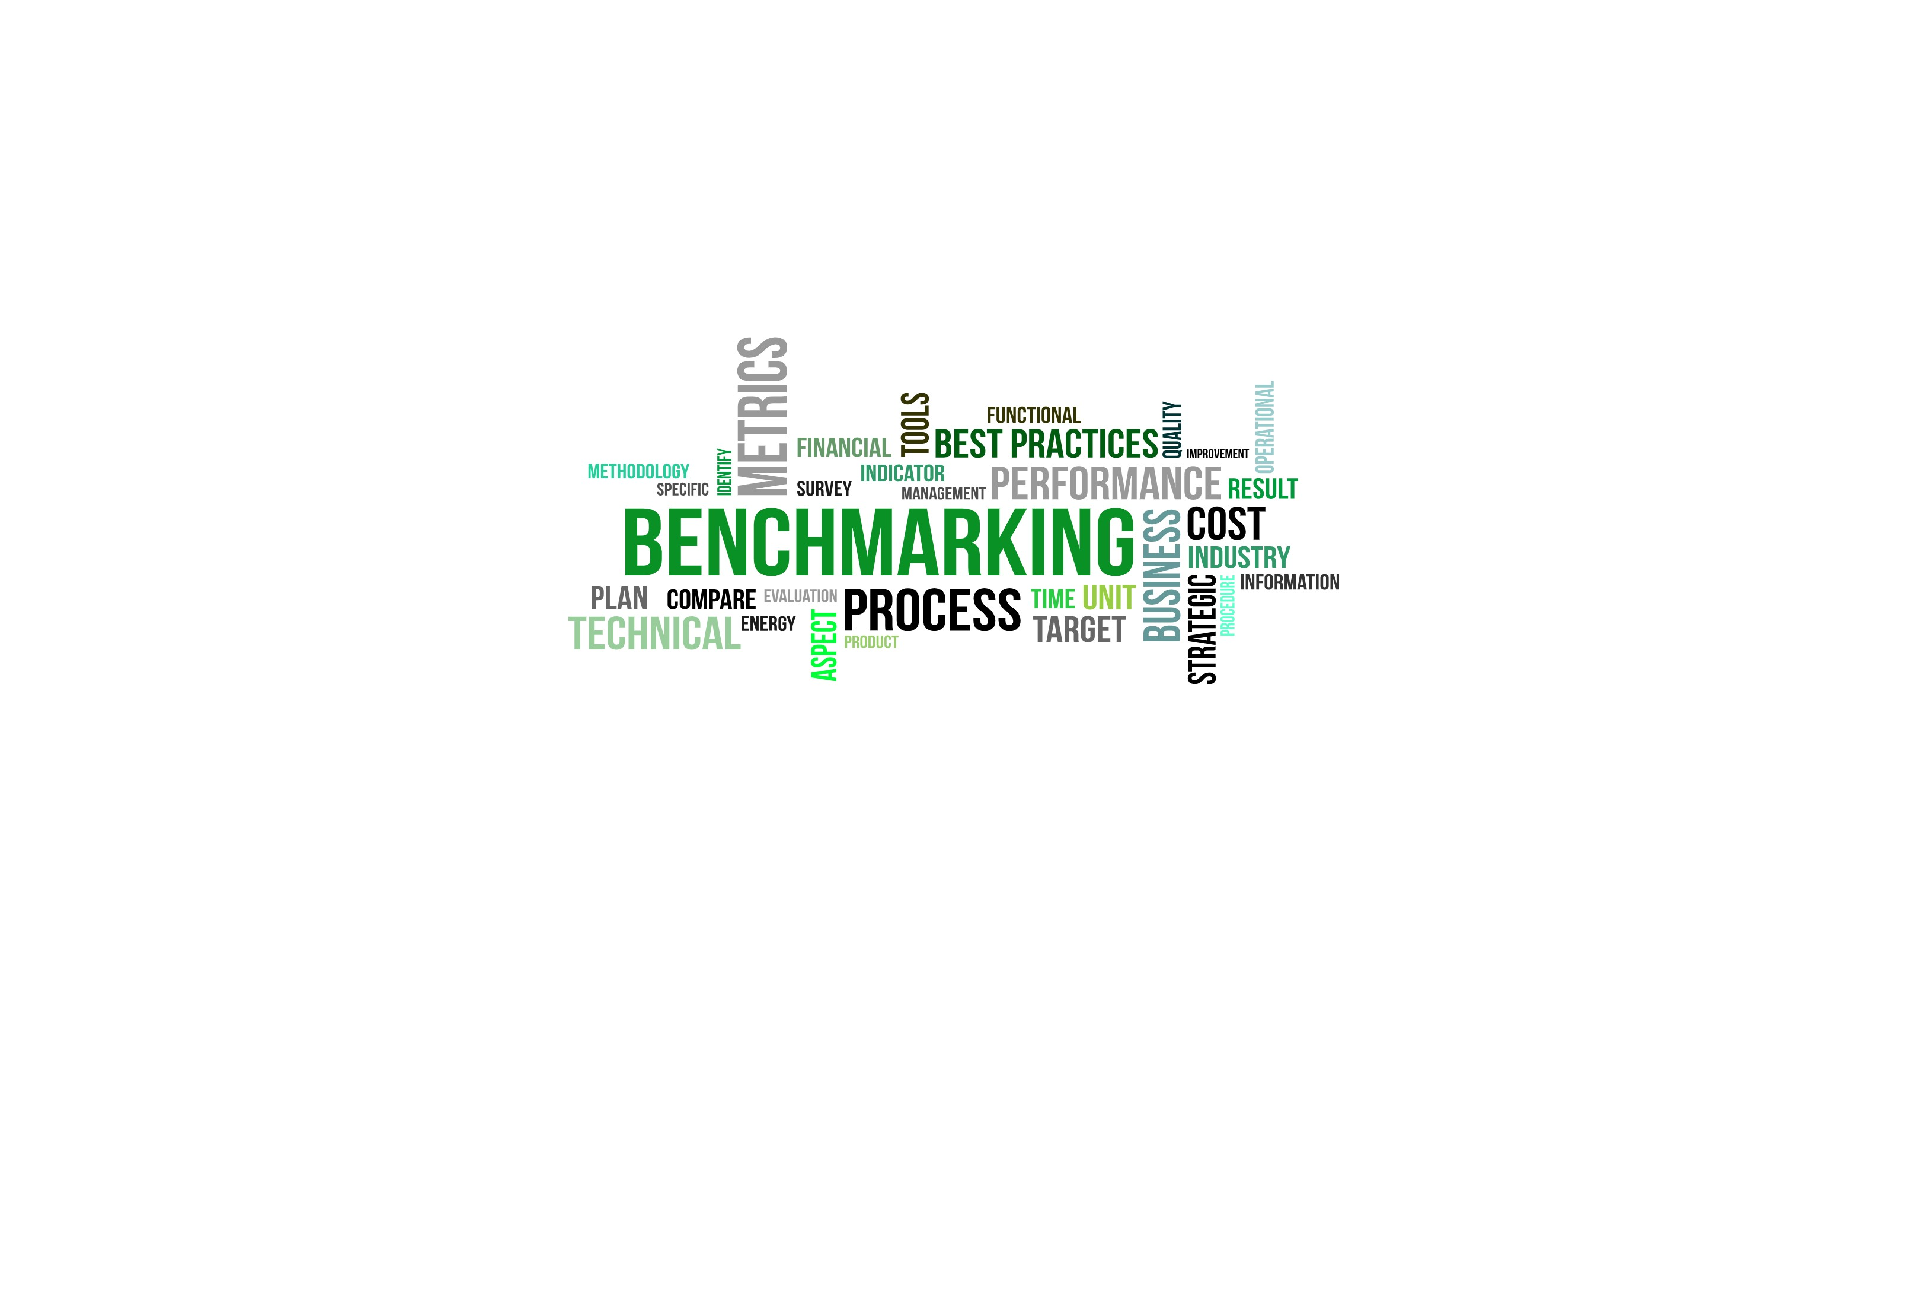 BENCHMARKING EXCELENCE